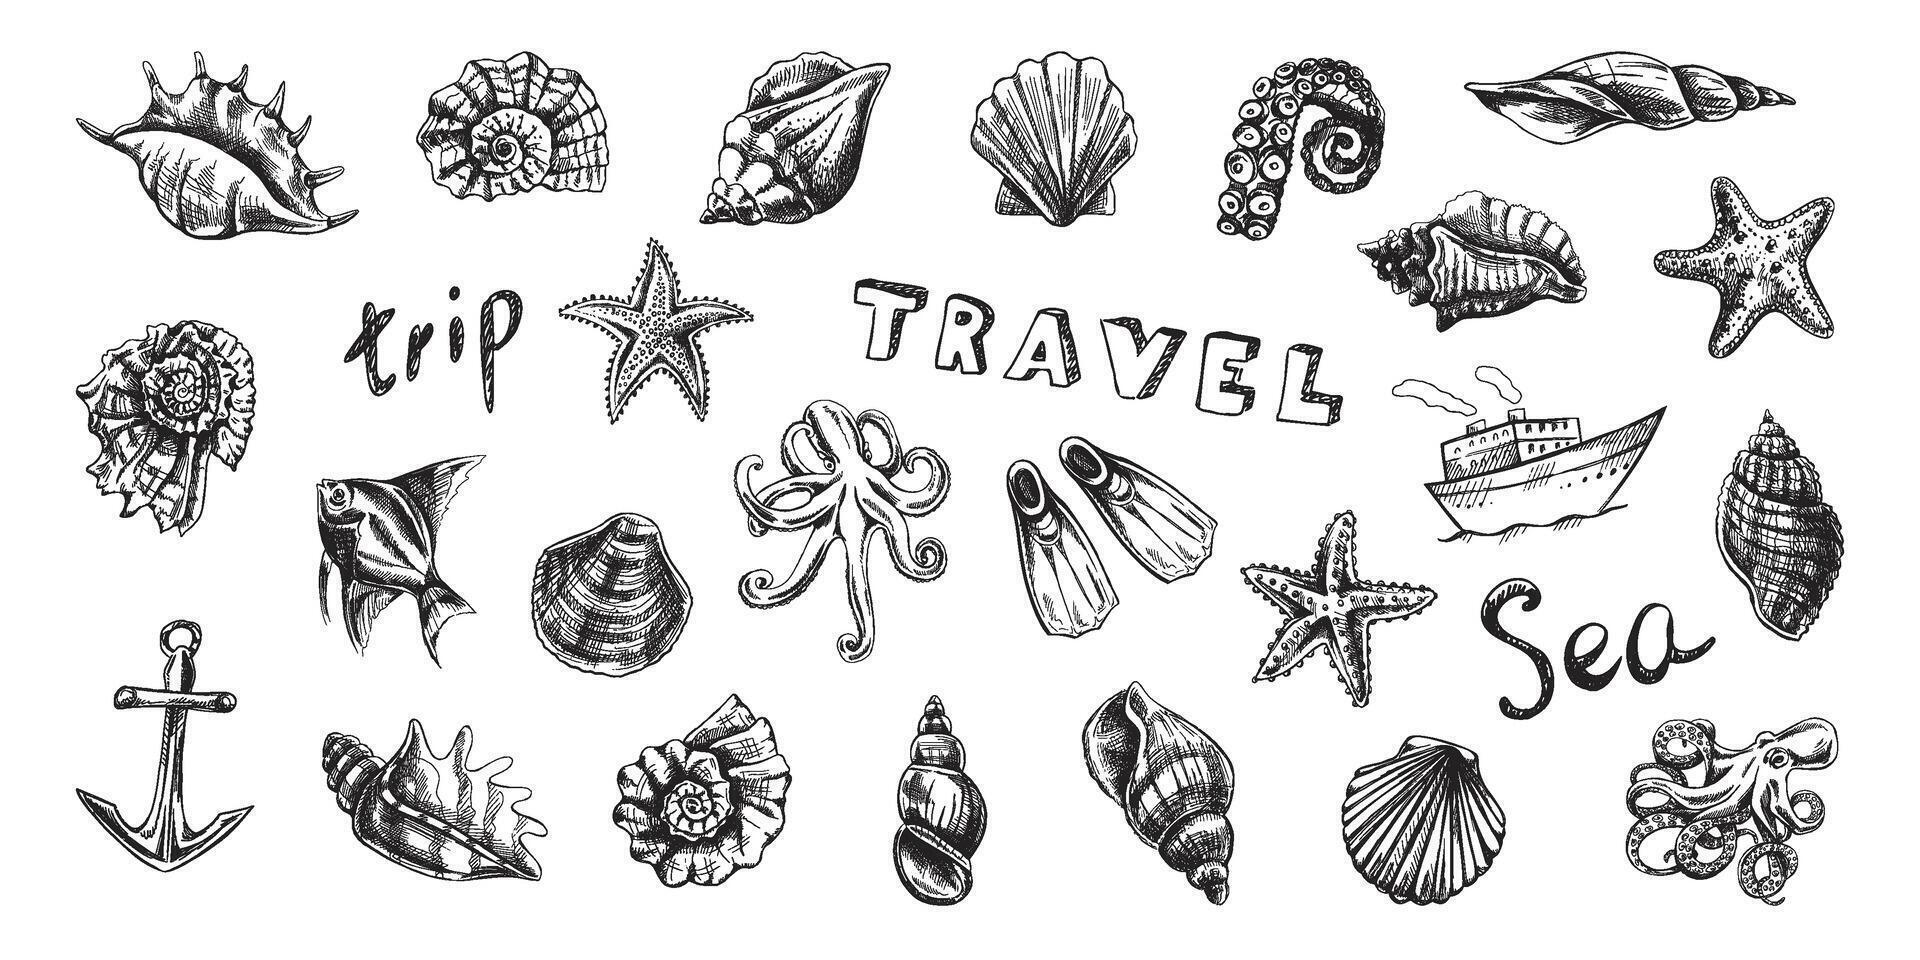 Ocean and Travel icons. Seashells, octopus, fish, starfish, seahorses, ammonite vector set. Hand drawn illustration. Collection of realistic sketches of various ocean creatures and letterings.